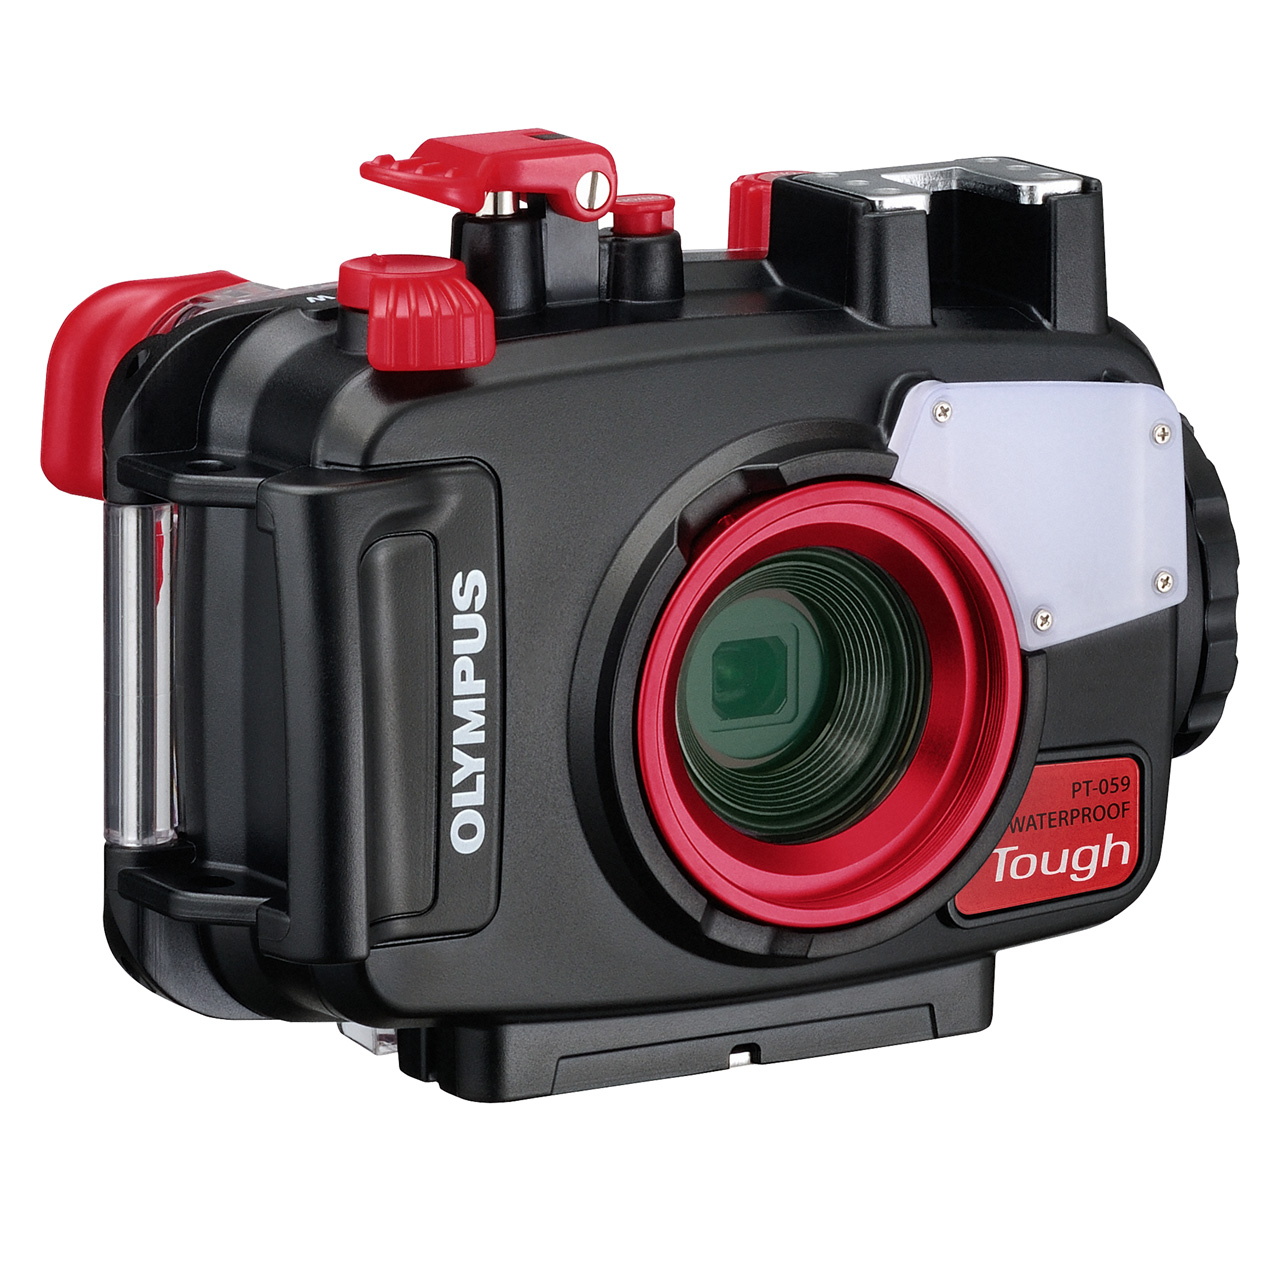 Olympus PCK-TG6-RED Tough TG-6 and PT-059 Package - Digital Diver